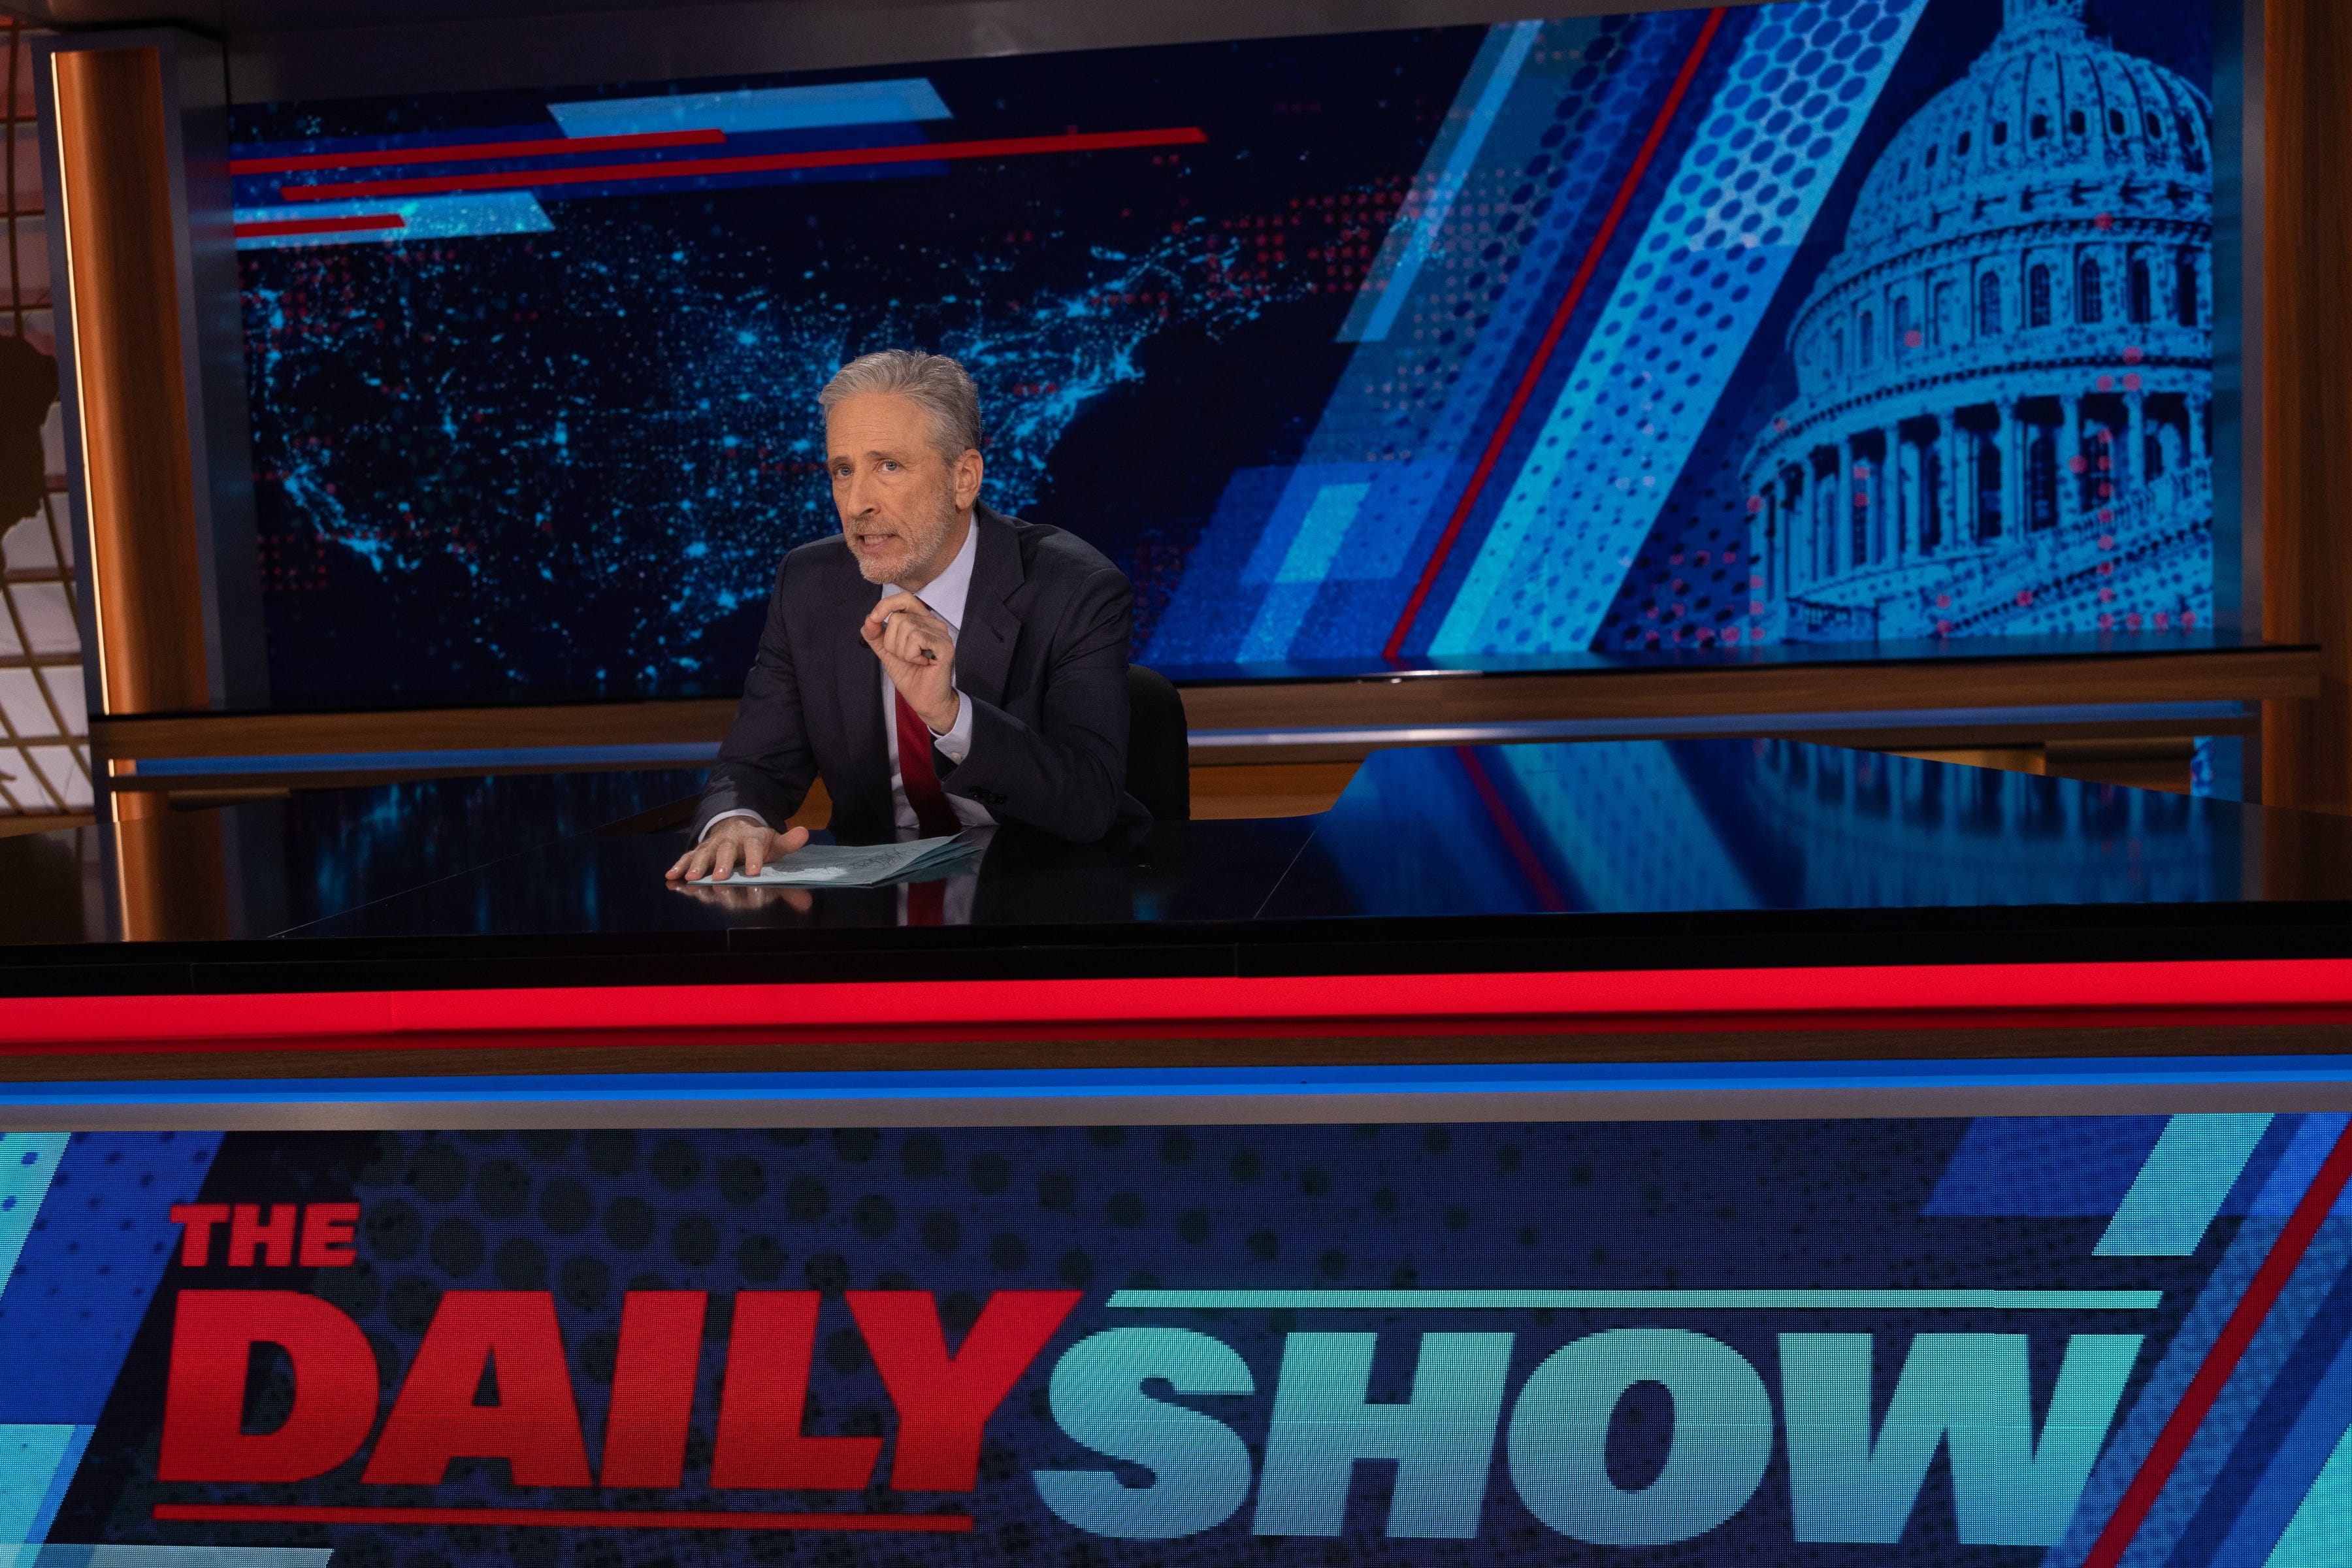 jon stewart chokes up in emotional 'daily show' segment about his dog's death